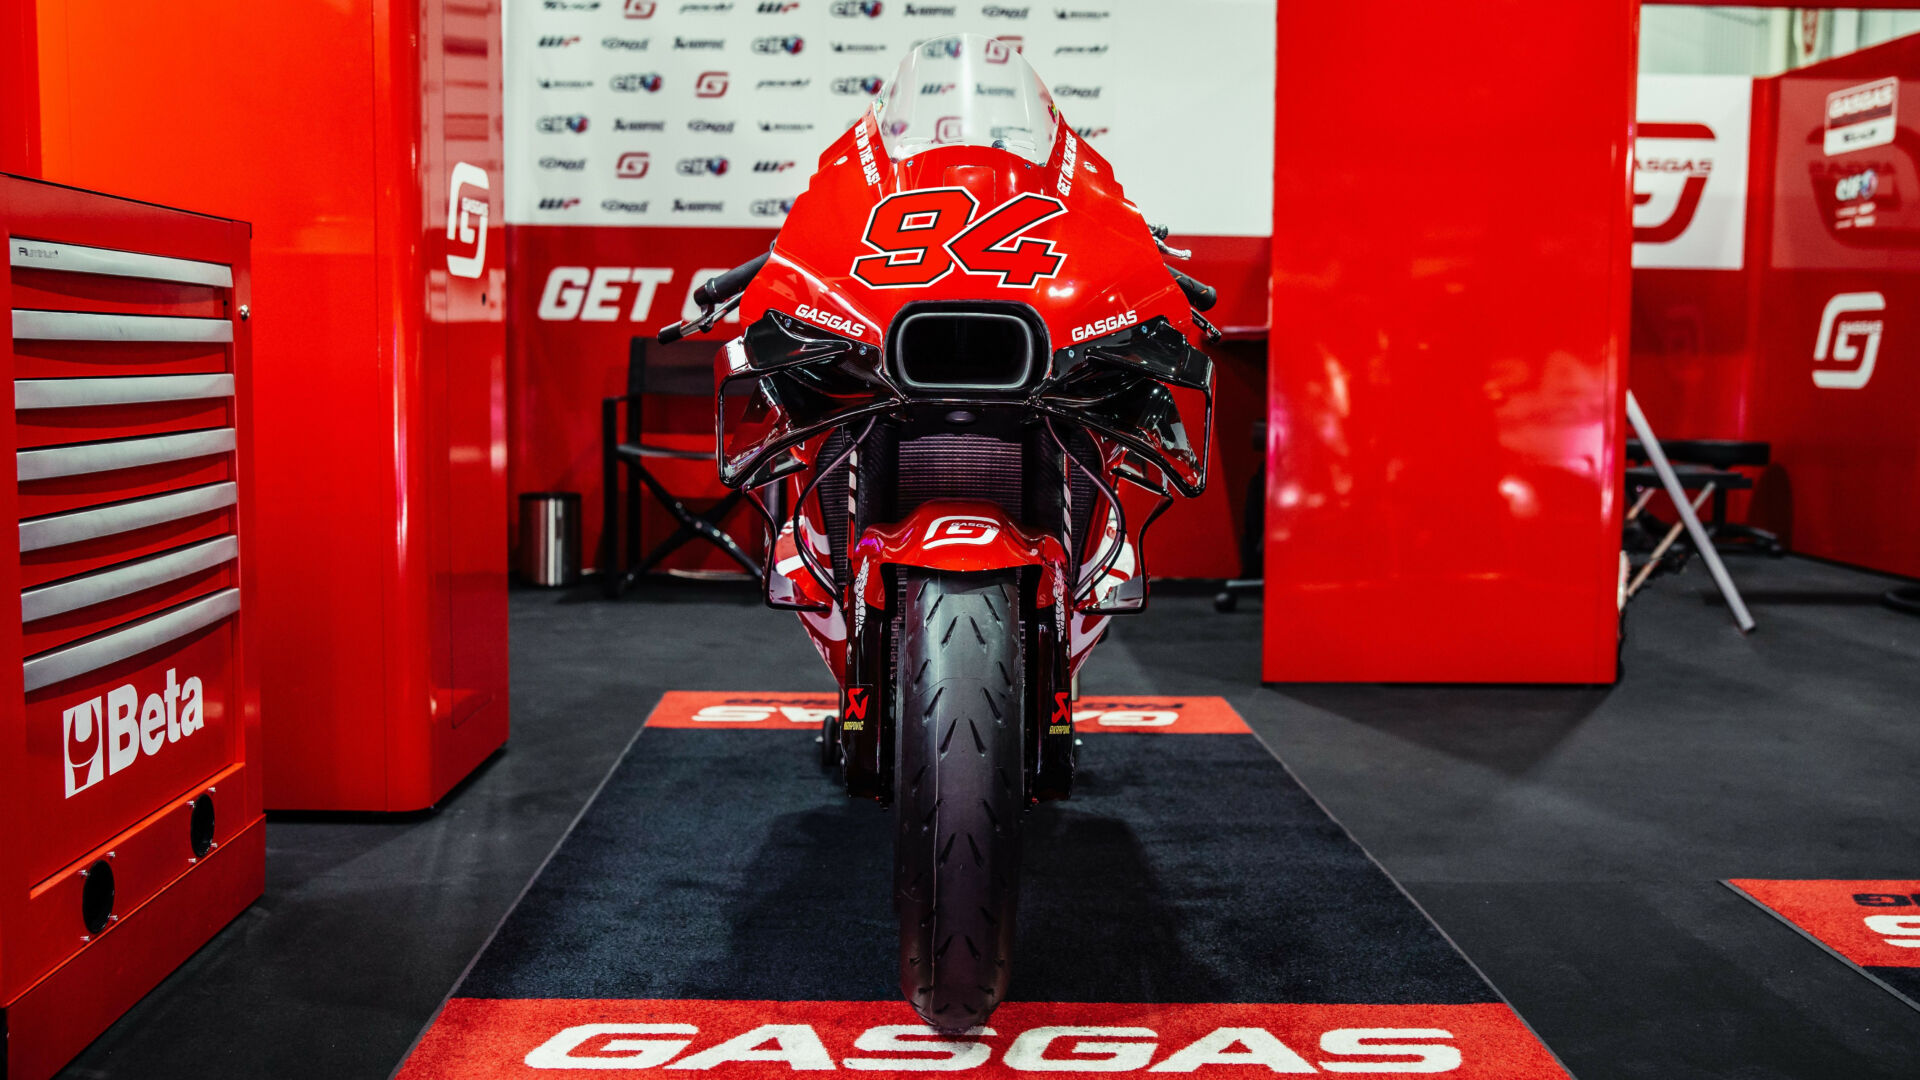 A GASGAS RC16 with Jonas Folger's #94 on it. Photo courtesy GASGAS Factory Racing